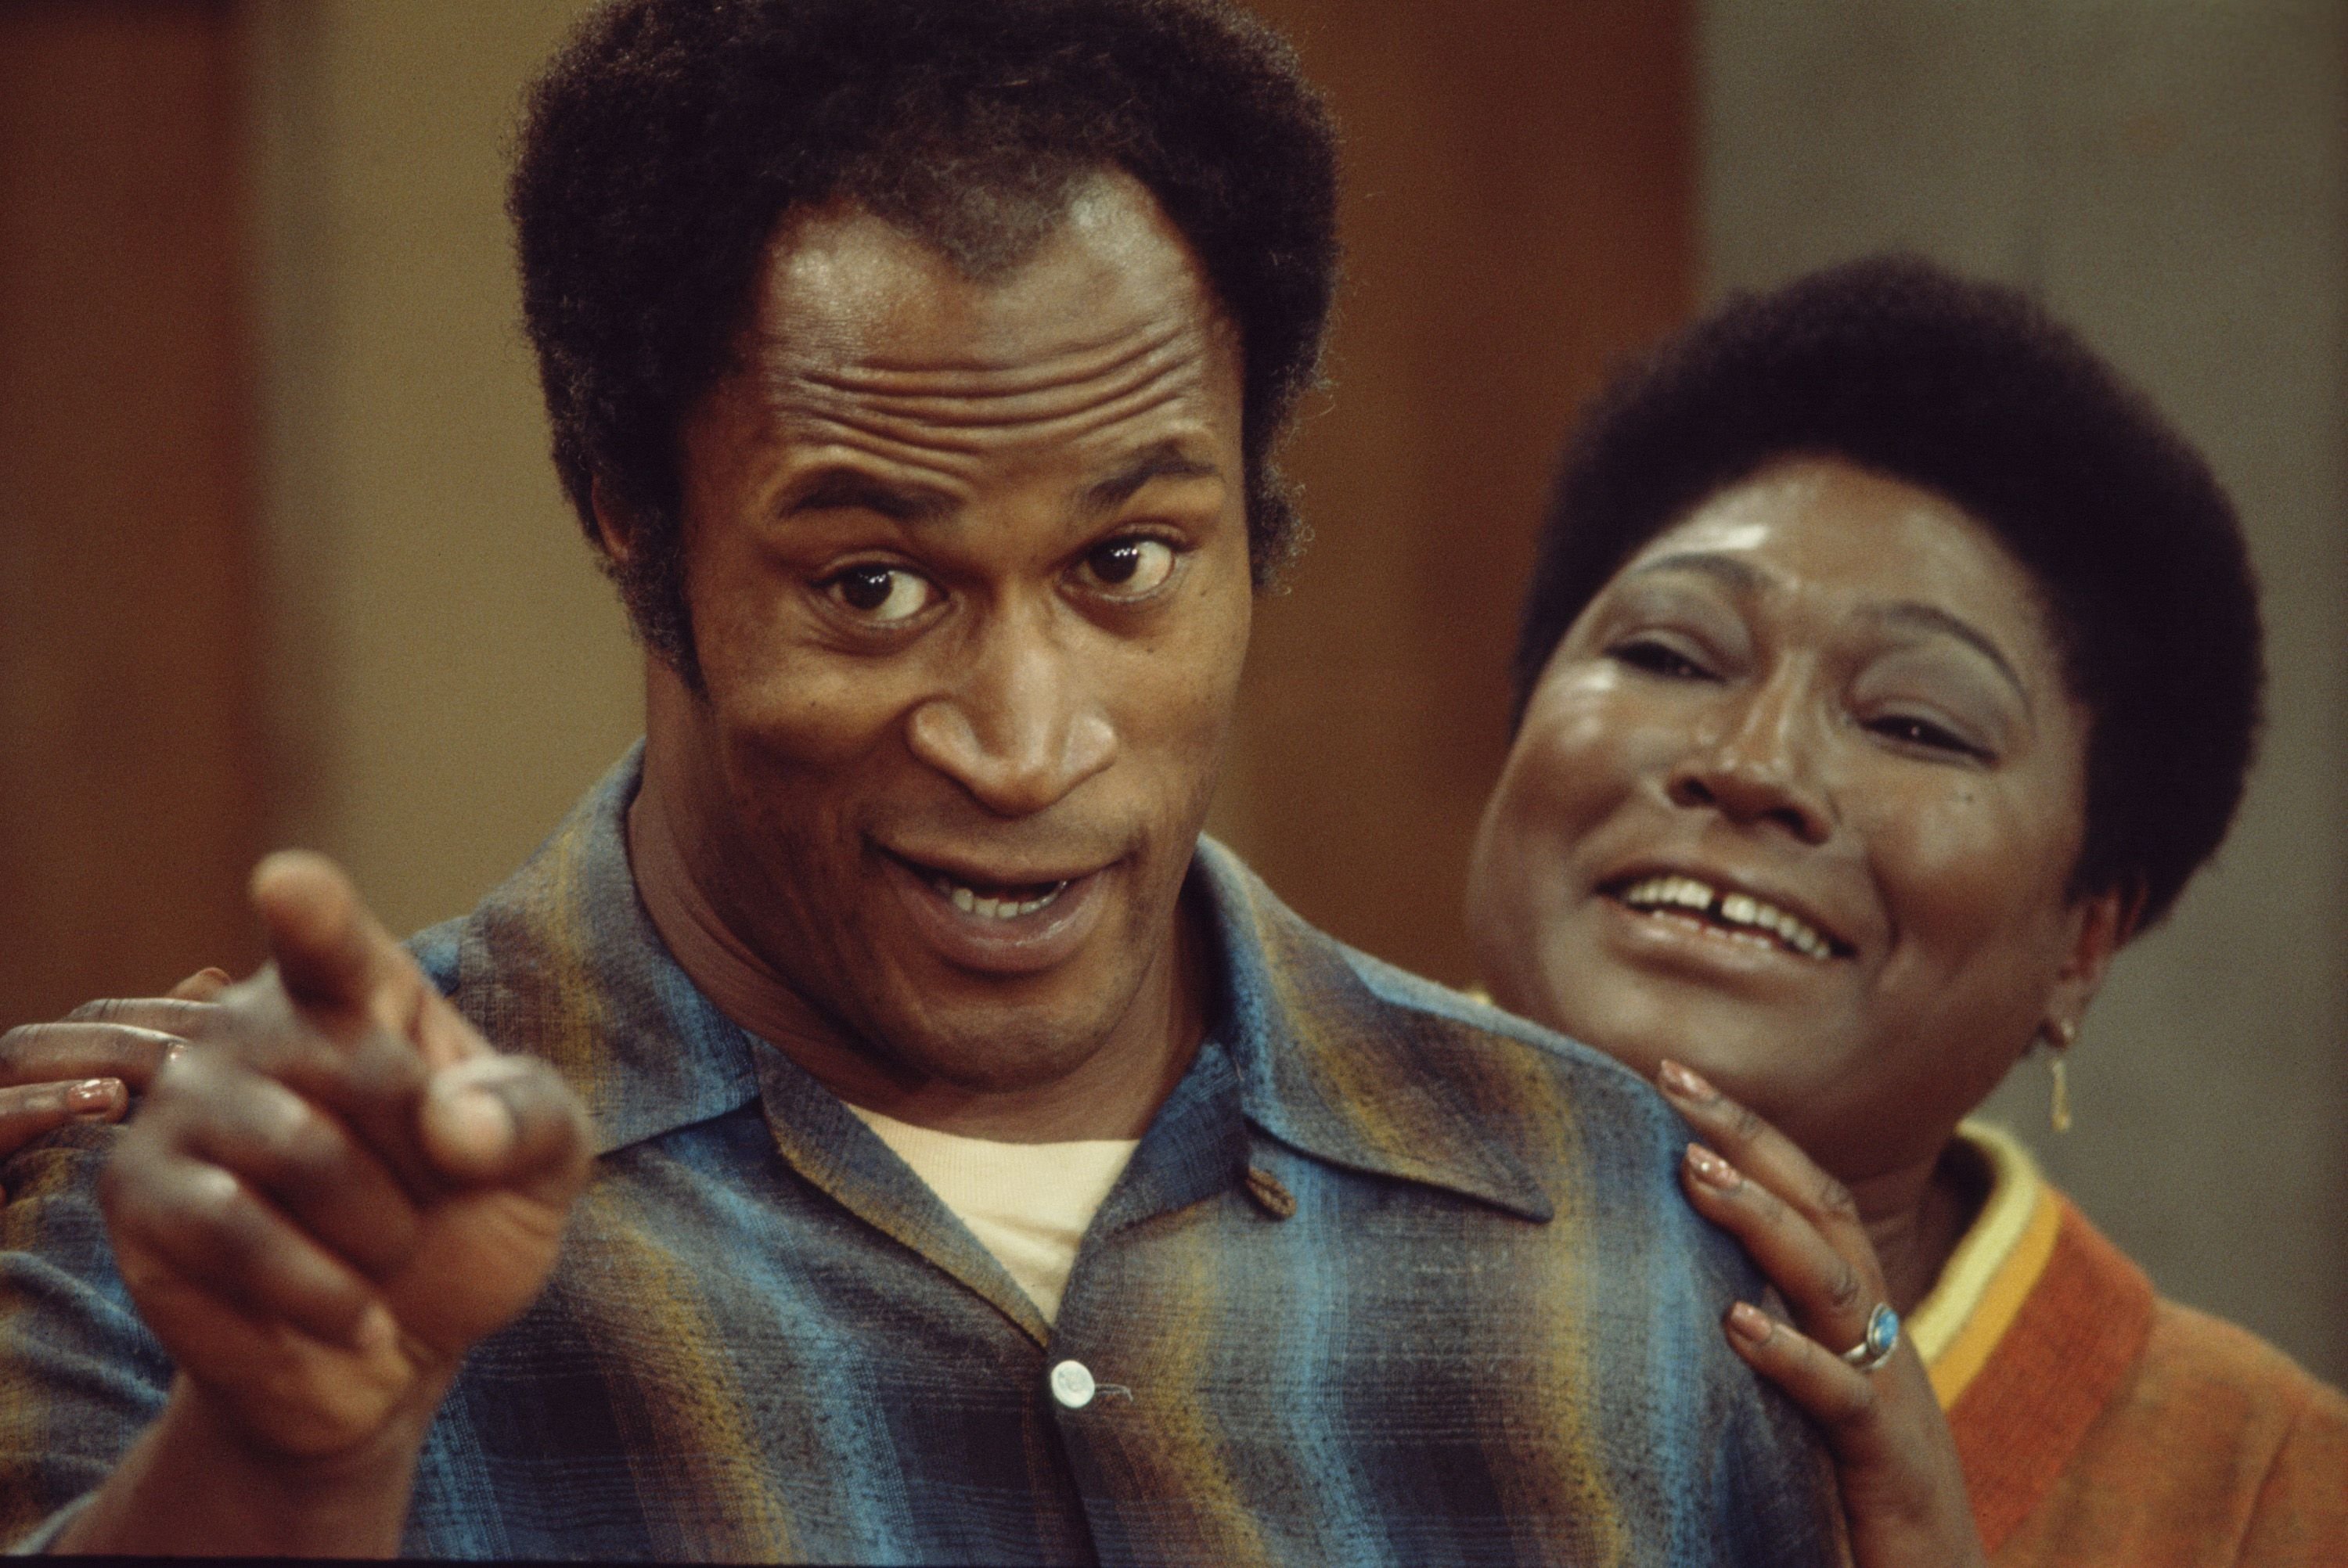 John Amos and Esther Rolle filming for a scene from the family sitcom "Good Times" in Los Angeles in 1975 | Source: CBS Photo Archive/Getty Images